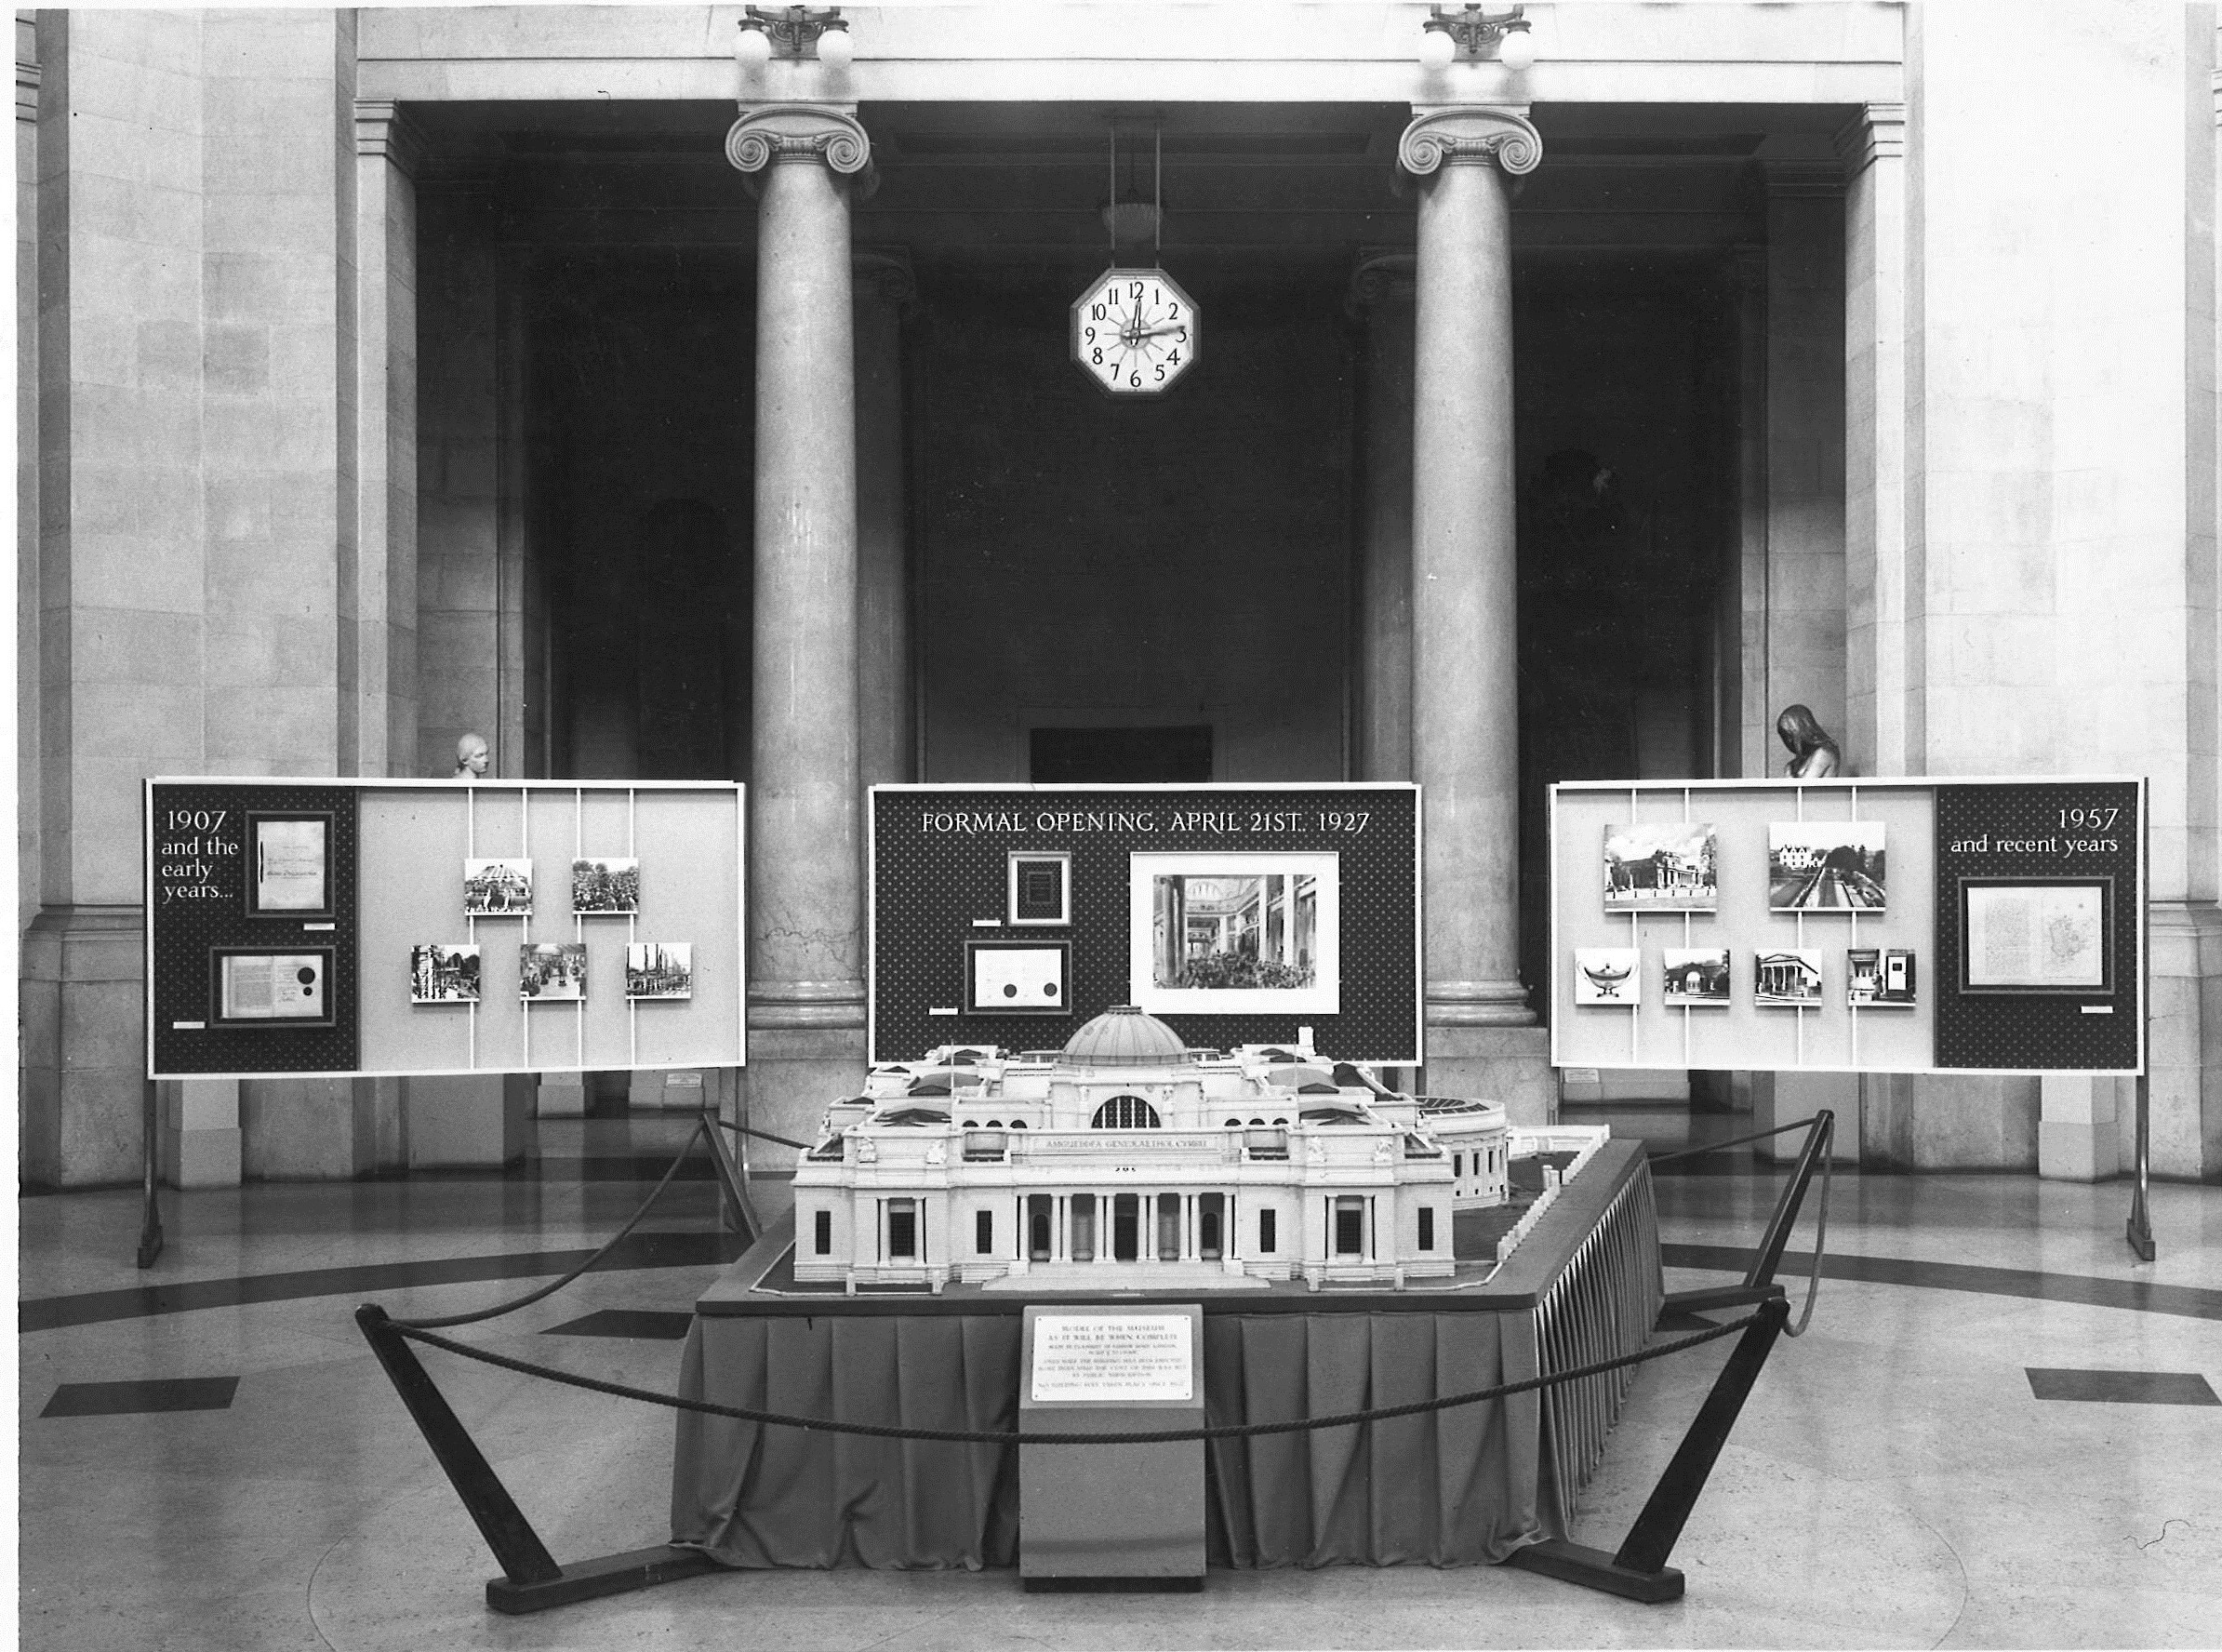  The original model of National Museum Wales building in Cathays Park displayed in the Main Hall to commemorate the Museum’s Jubilee anniversary in 1957